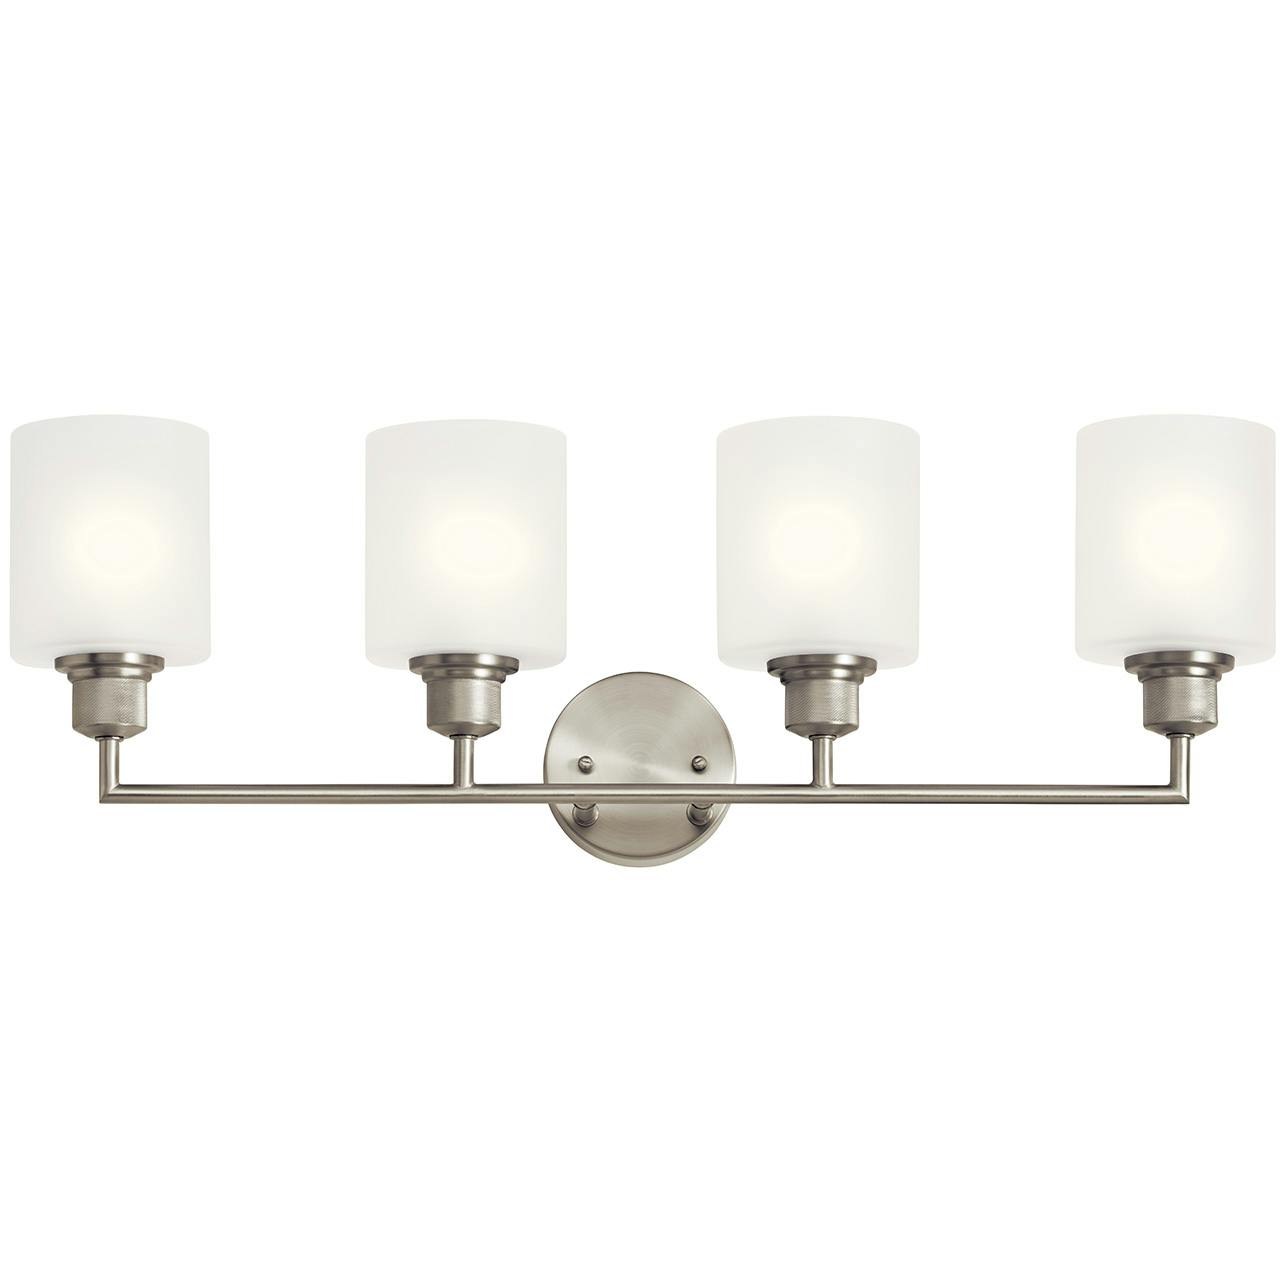 The Lynn Haven 4 Light Vanity Light Nickel facing up on a white background